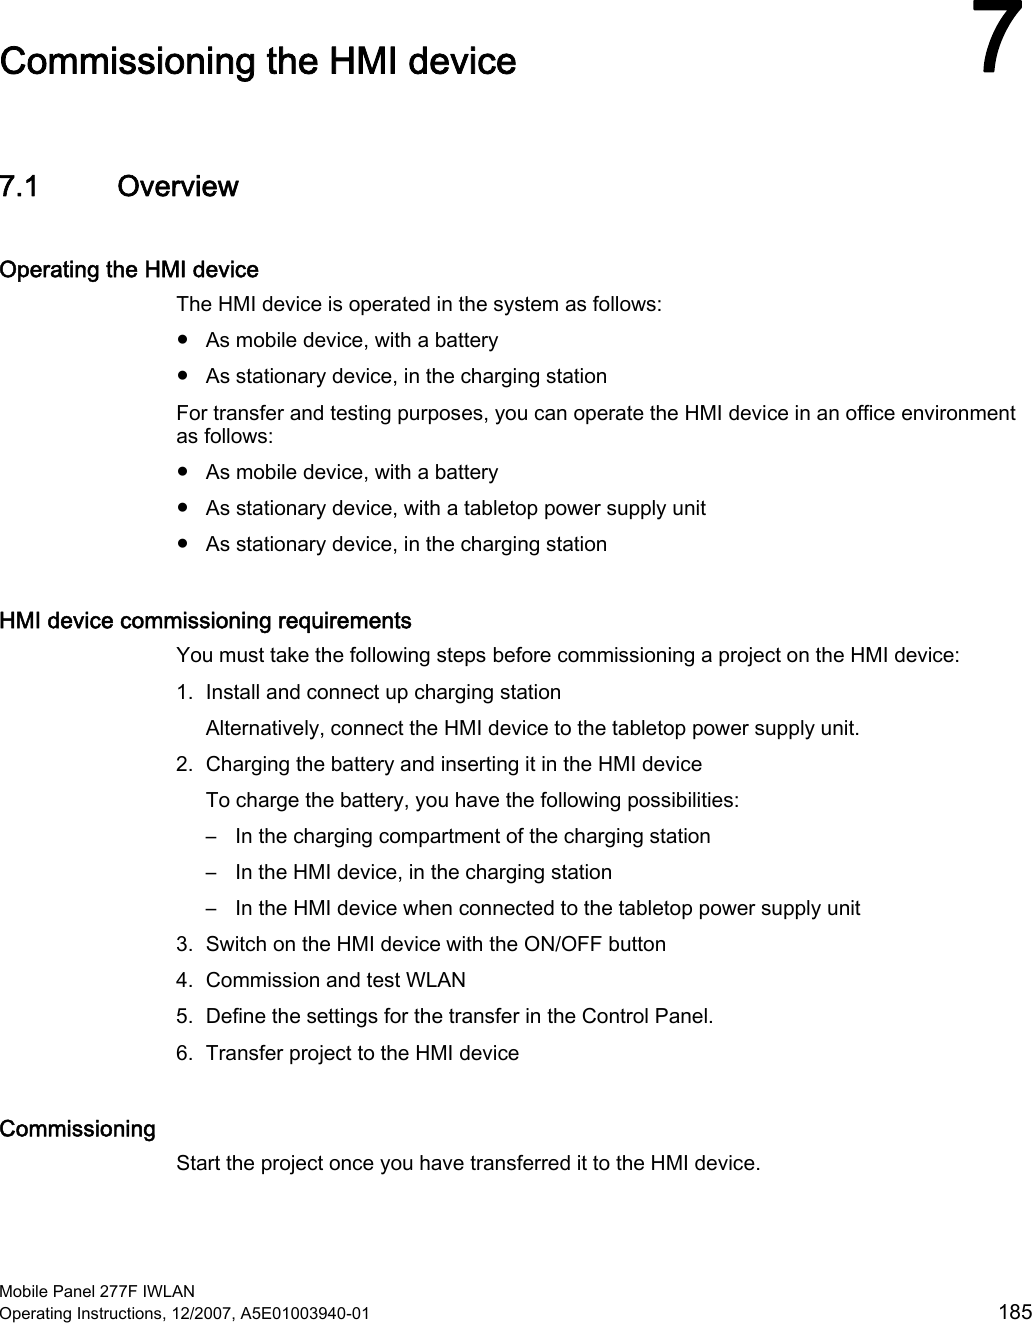  Mobile Panel 277F IWLAN Operating Instructions, 12/2007, A5E01003940-01  185 Commissioning the HMI device  77.1 Overview Operating the HMI device The HMI device is operated in the system as follows: ●  As mobile device, with a battery ●  As stationary device, in the charging station For transfer and testing purposes, you can operate the HMI device in an office environment as follows: ●  As mobile device, with a battery ●  As stationary device, with a tabletop power supply unit ●  As stationary device, in the charging station HMI device commissioning requirements You must take the following steps before commissioning a project on the HMI device: 1. Install and connect up charging station Alternatively, connect the HMI device to the tabletop power supply unit. 2. Charging the battery and inserting it in the HMI device To charge the battery, you have the following possibilities: –  In the charging compartment of the charging station –  In the HMI device, in the charging station –  In the HMI device when connected to the tabletop power supply unit 3. Switch on the HMI device with the ON/OFF button 4. Commission and test WLAN 5. Define the settings for the transfer in the Control Panel. 6. Transfer project to the HMI device Commissioning Start the project once you have transferred it to the HMI device. 